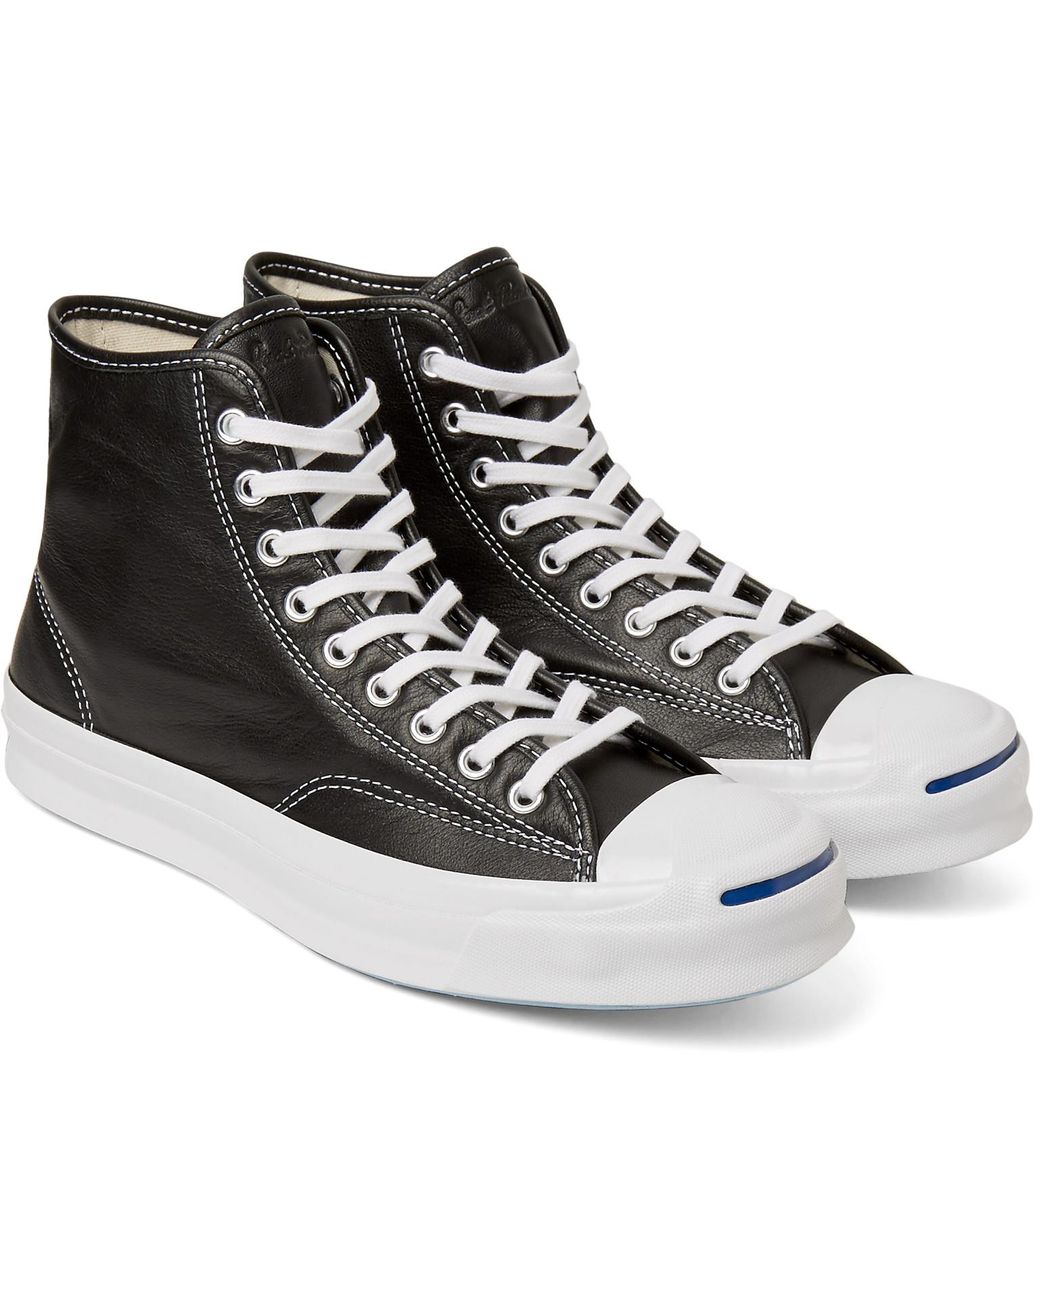 Converse Jack Purcell Signature Leather High-top Sneakers in Black